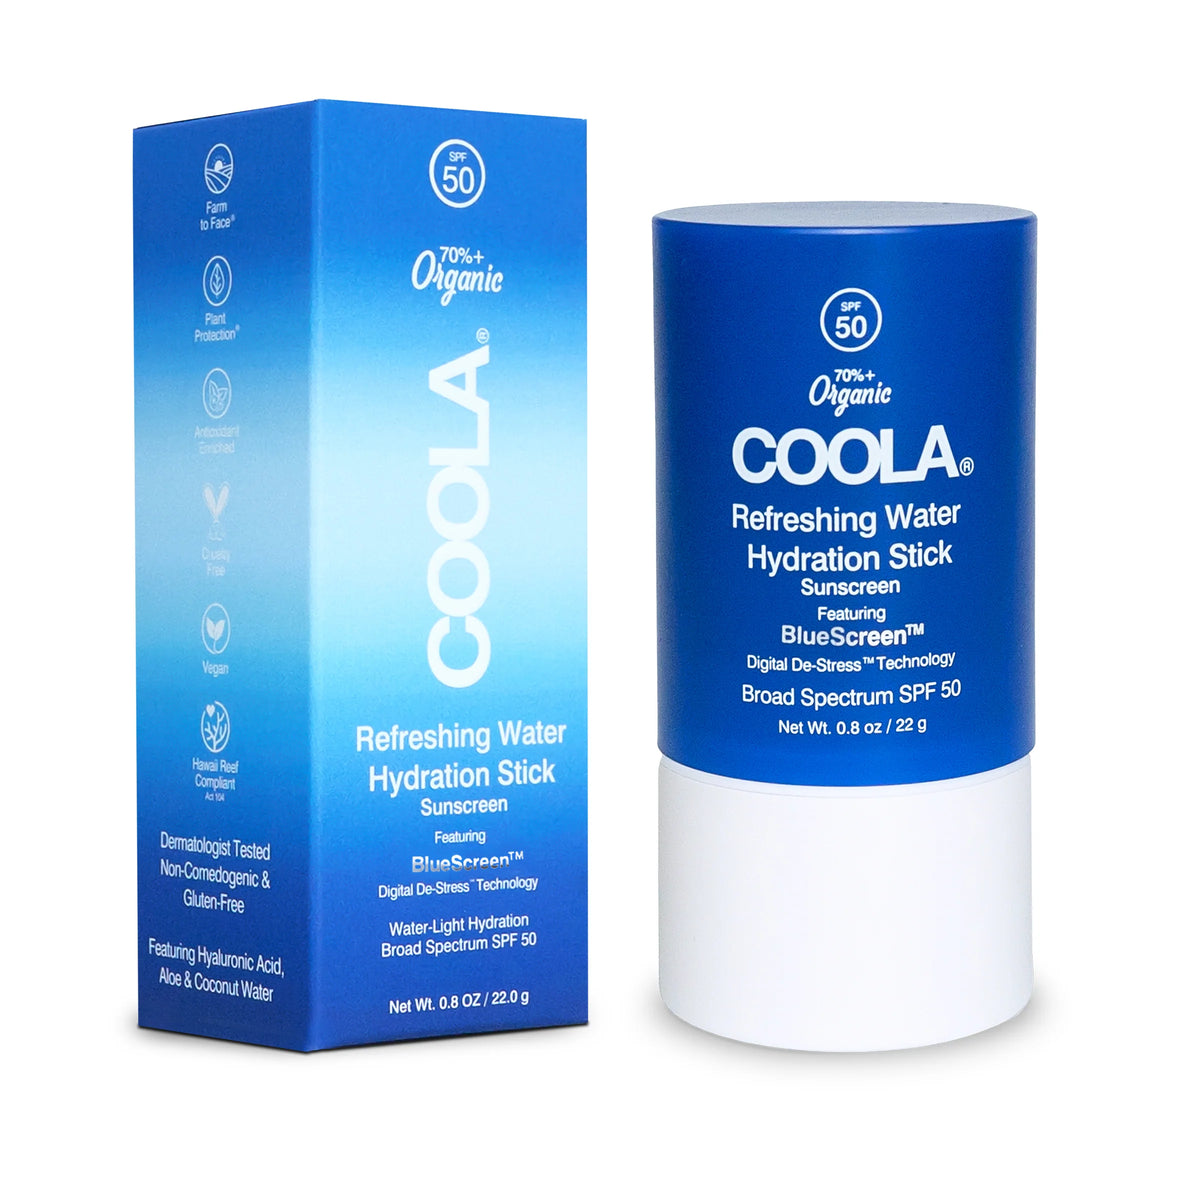 Coola - Refreshing Water Hydration Stick